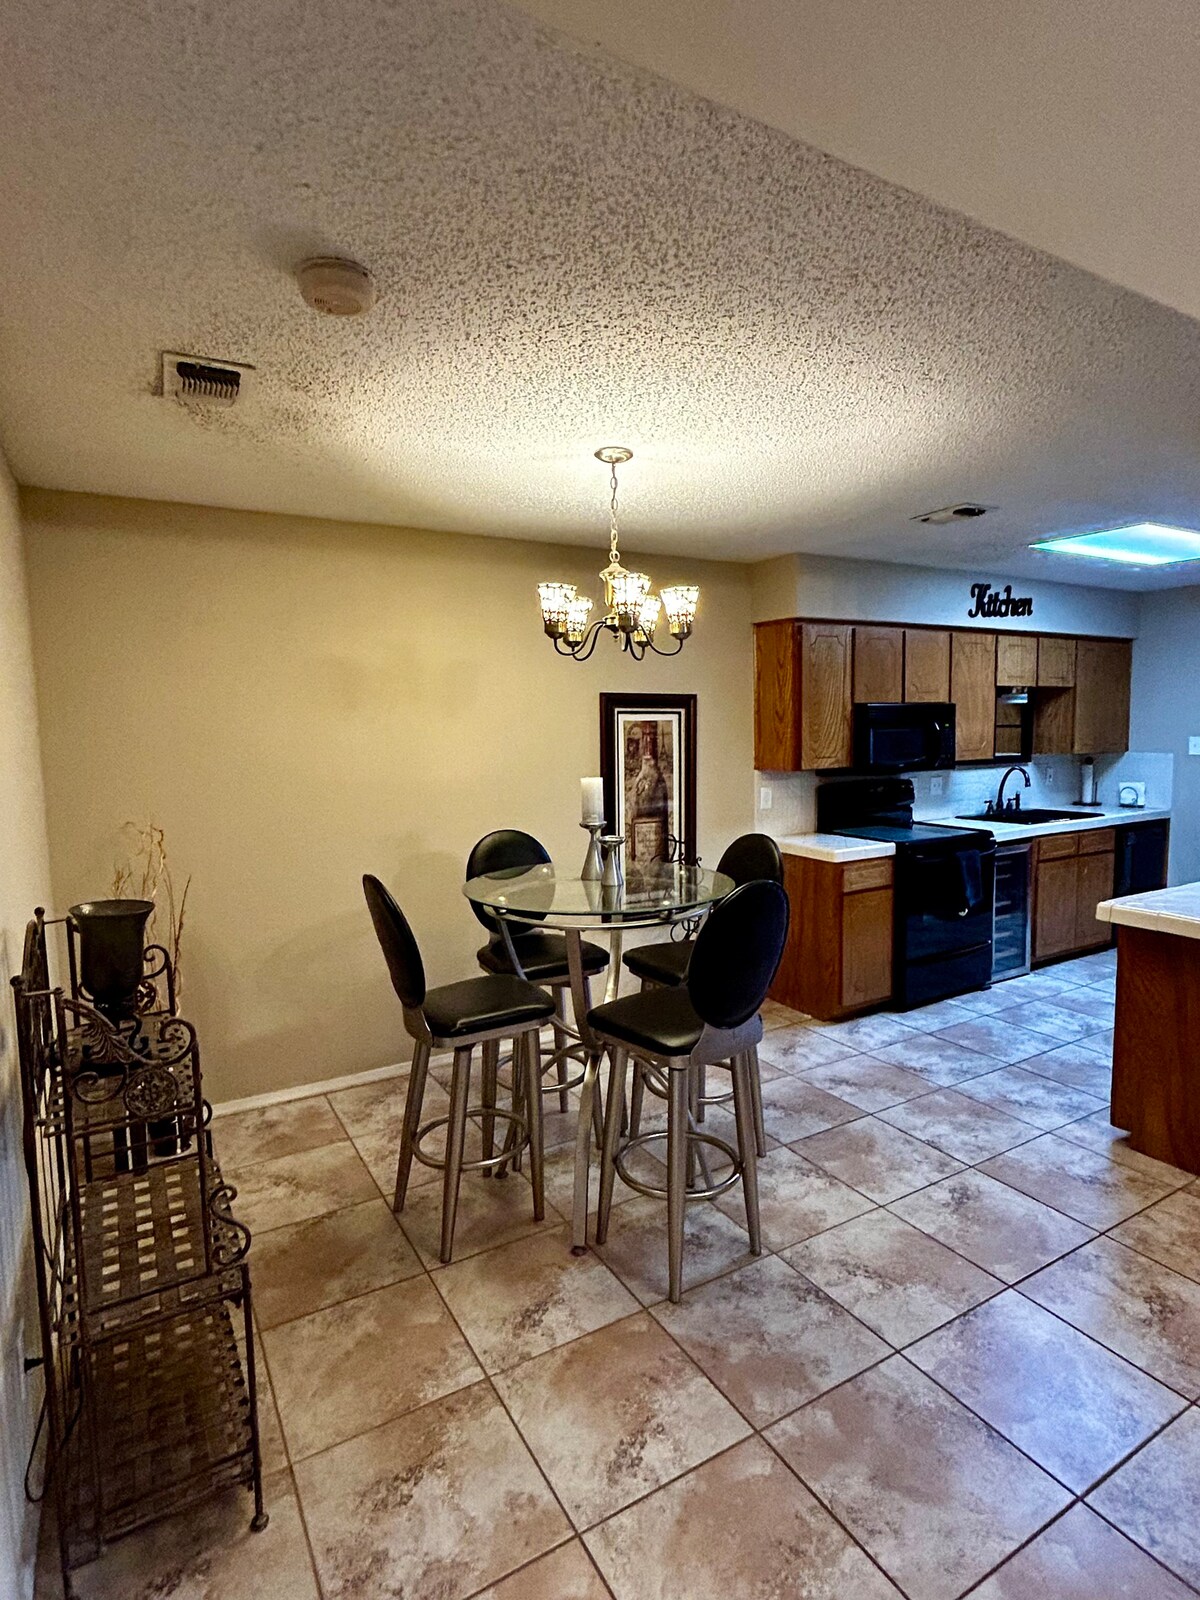 Entire townhome in San Angelo TX